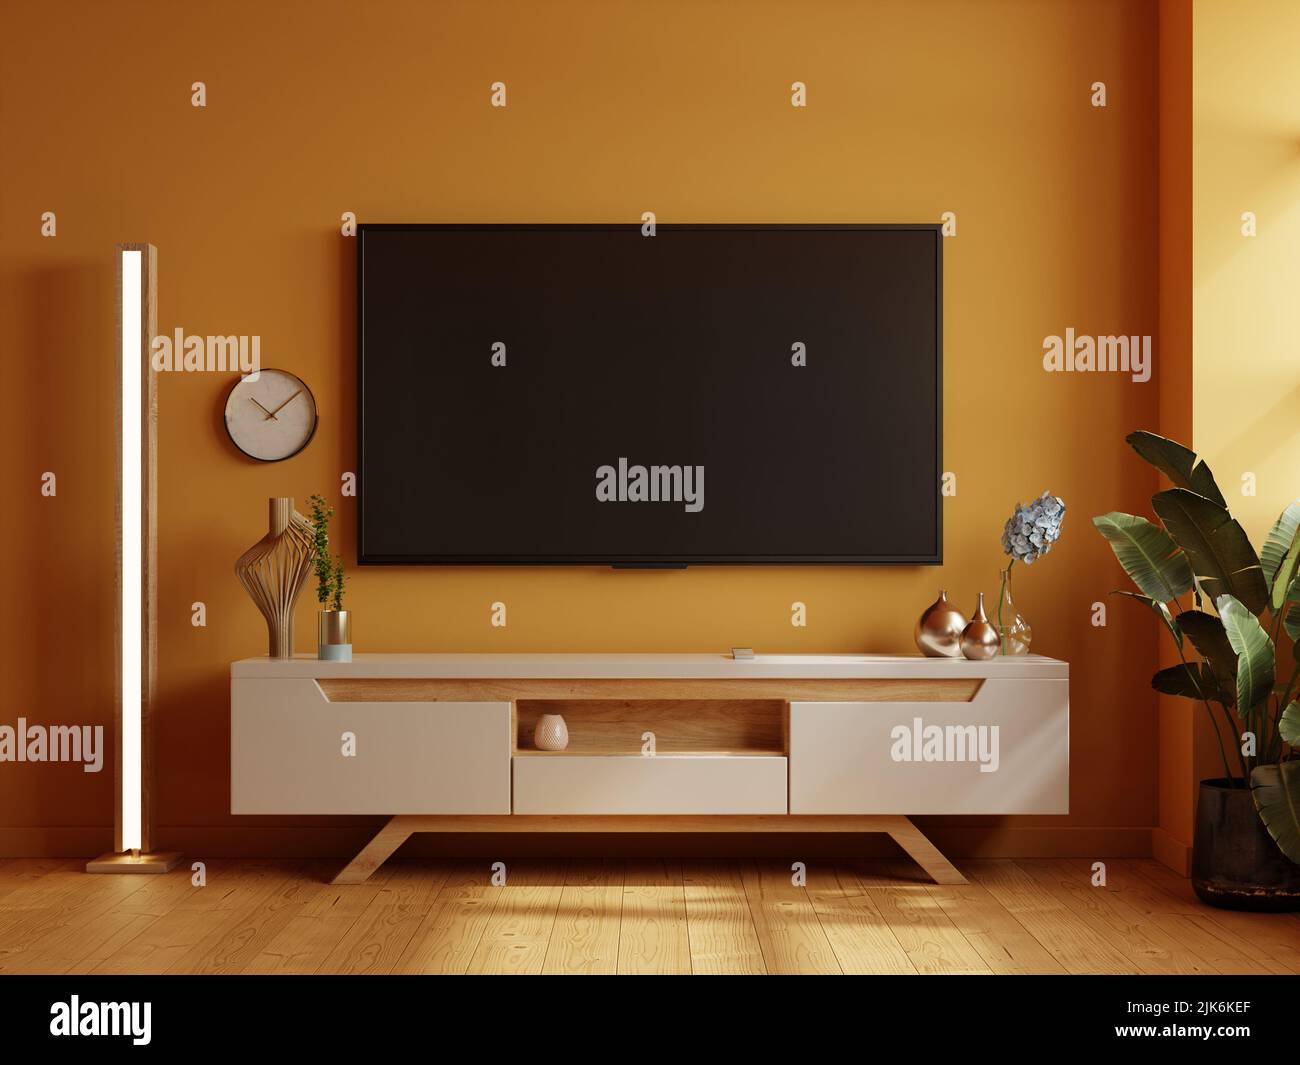 TV room in yellow wall background,Modern living room decor with a tv wooden   rendering Stock Photo - Alamy